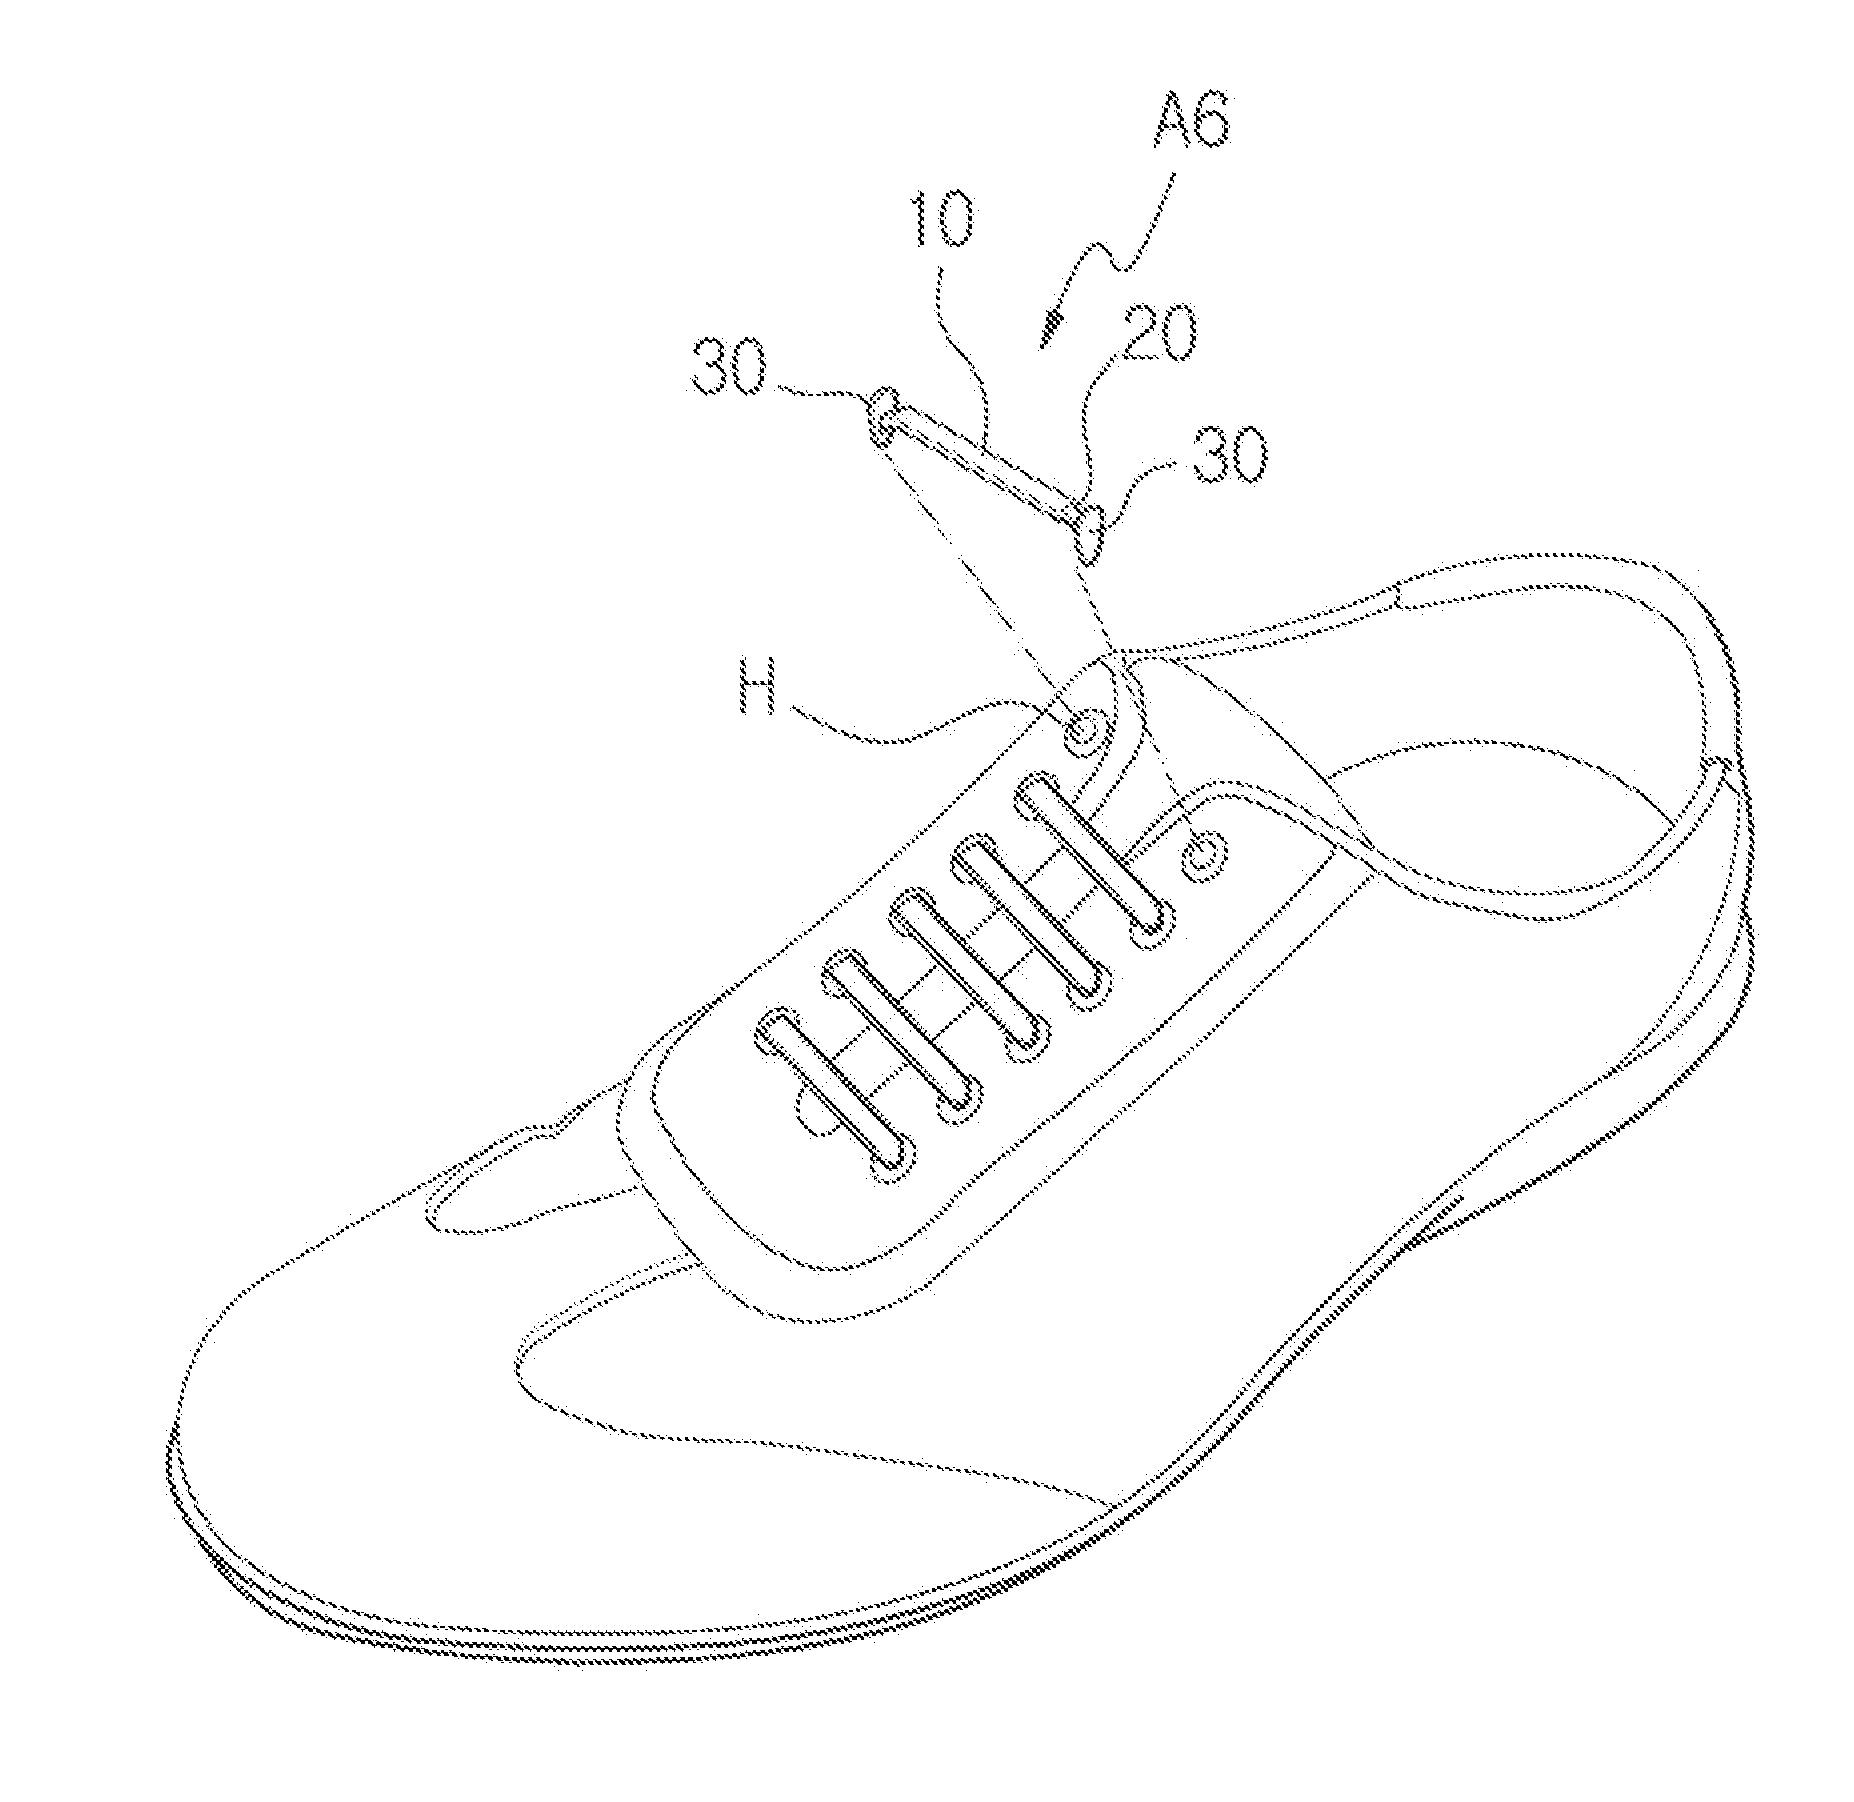 Device for tying shoes